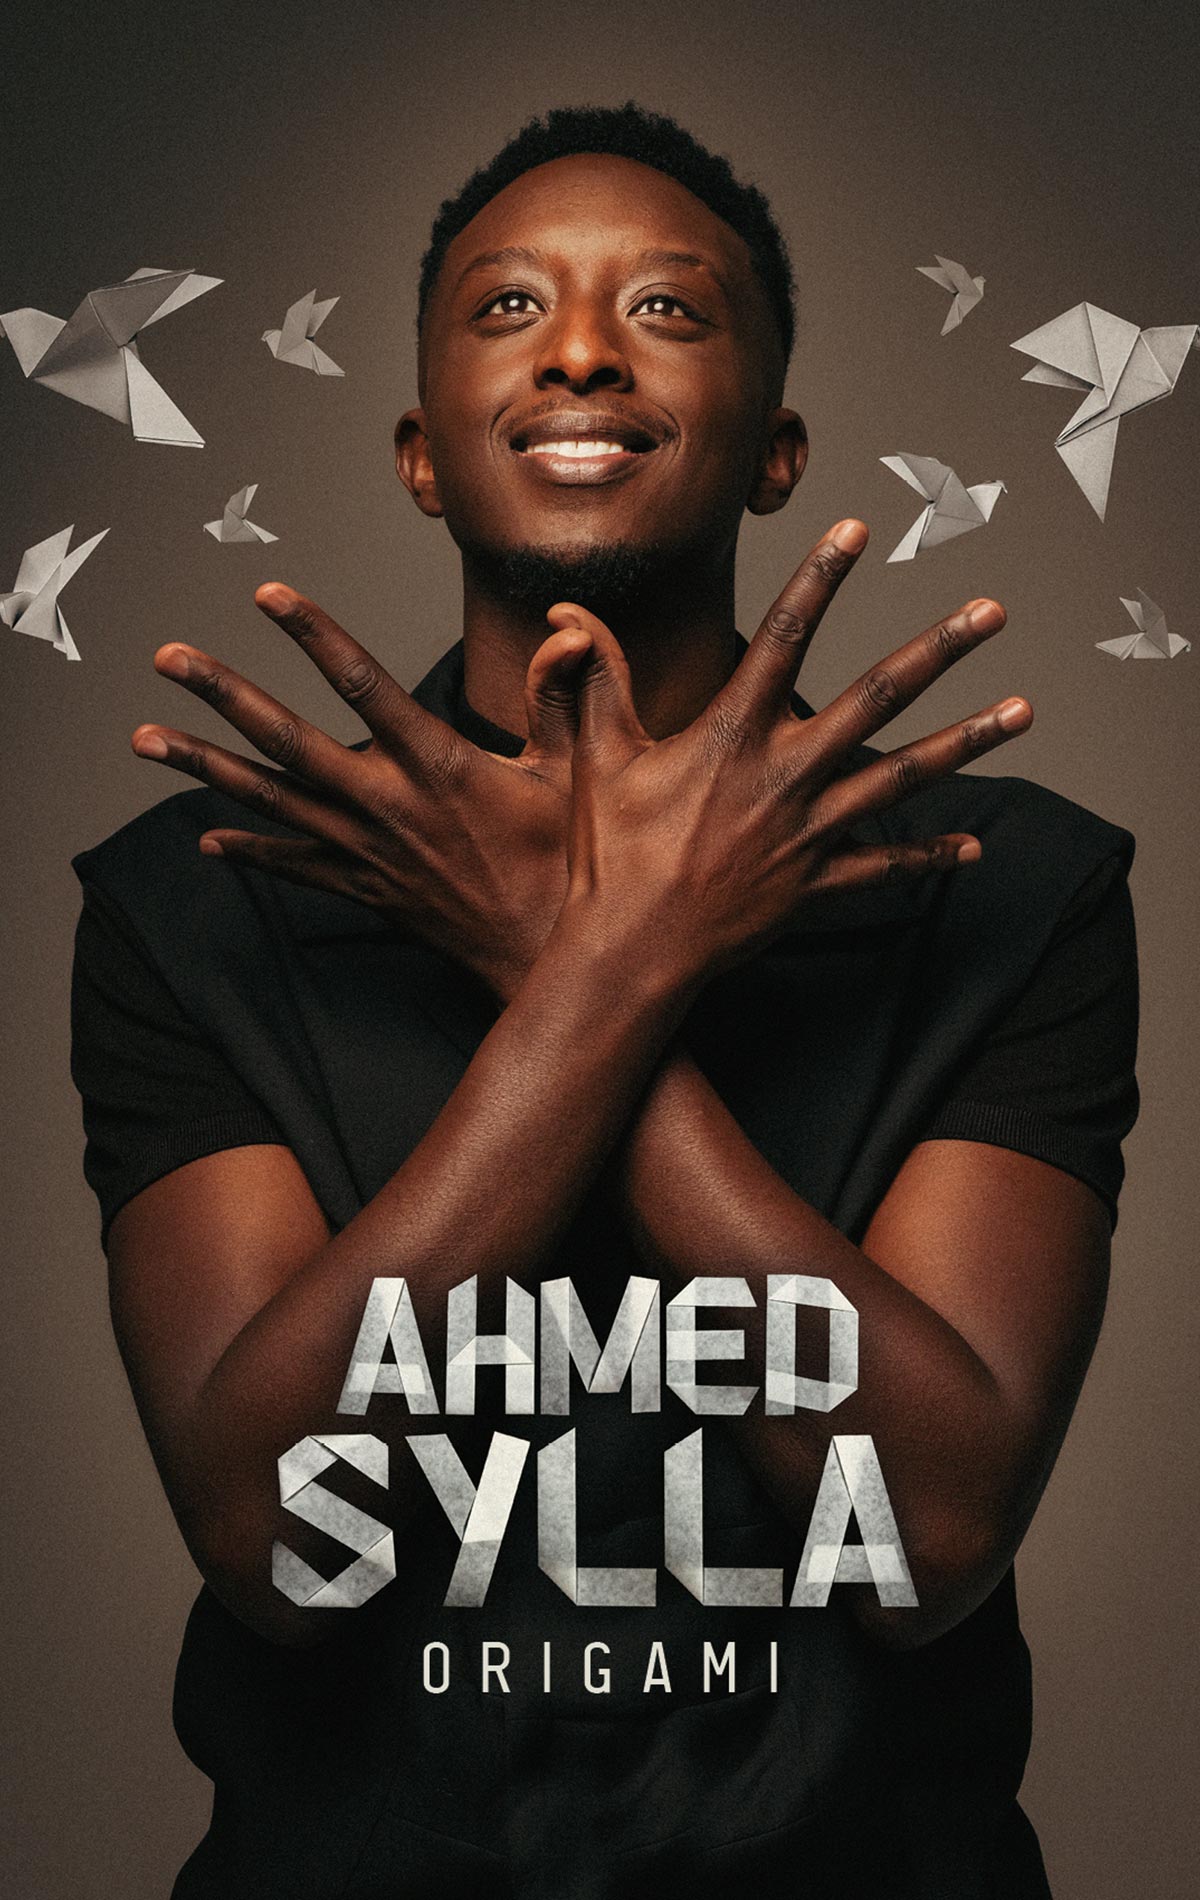 Ahmed Sylla at Bourse du Travail Tickets